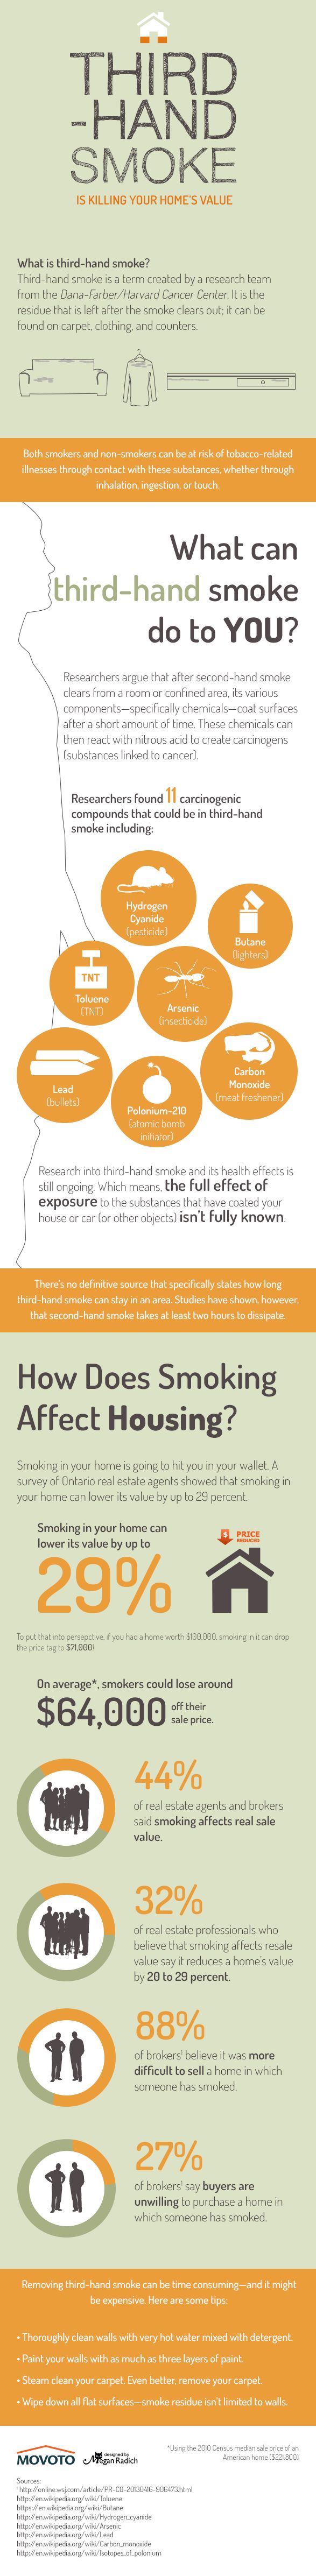 Health infographic : How third-hand smoke ruins your home [Infographic ...